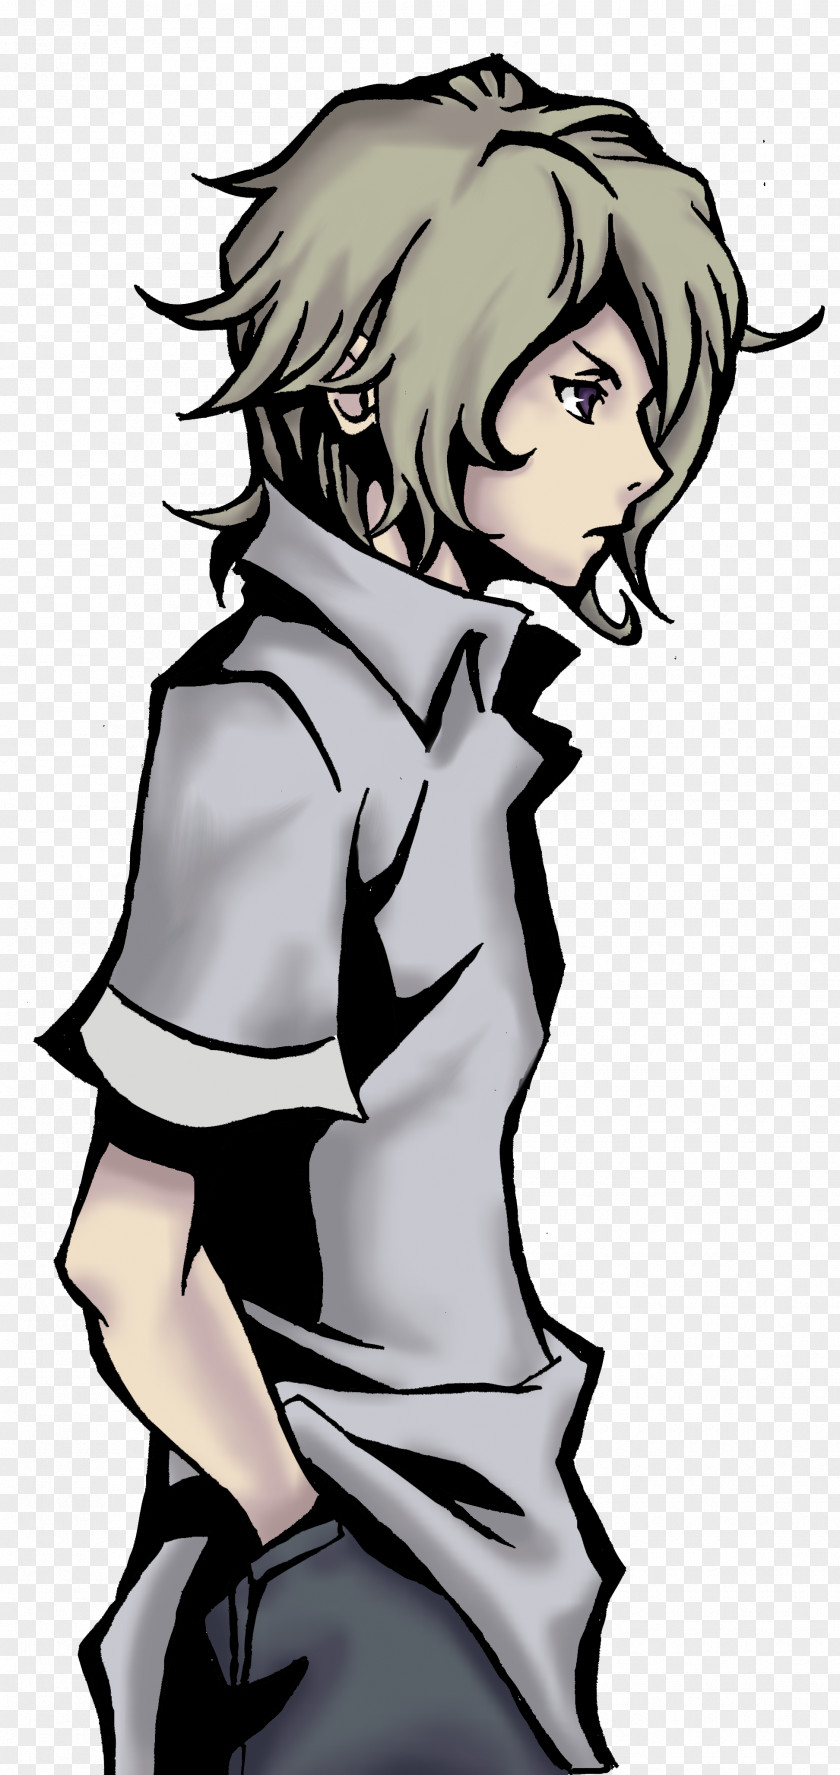 The World Ends With You DeviantArt Fan Art PNG